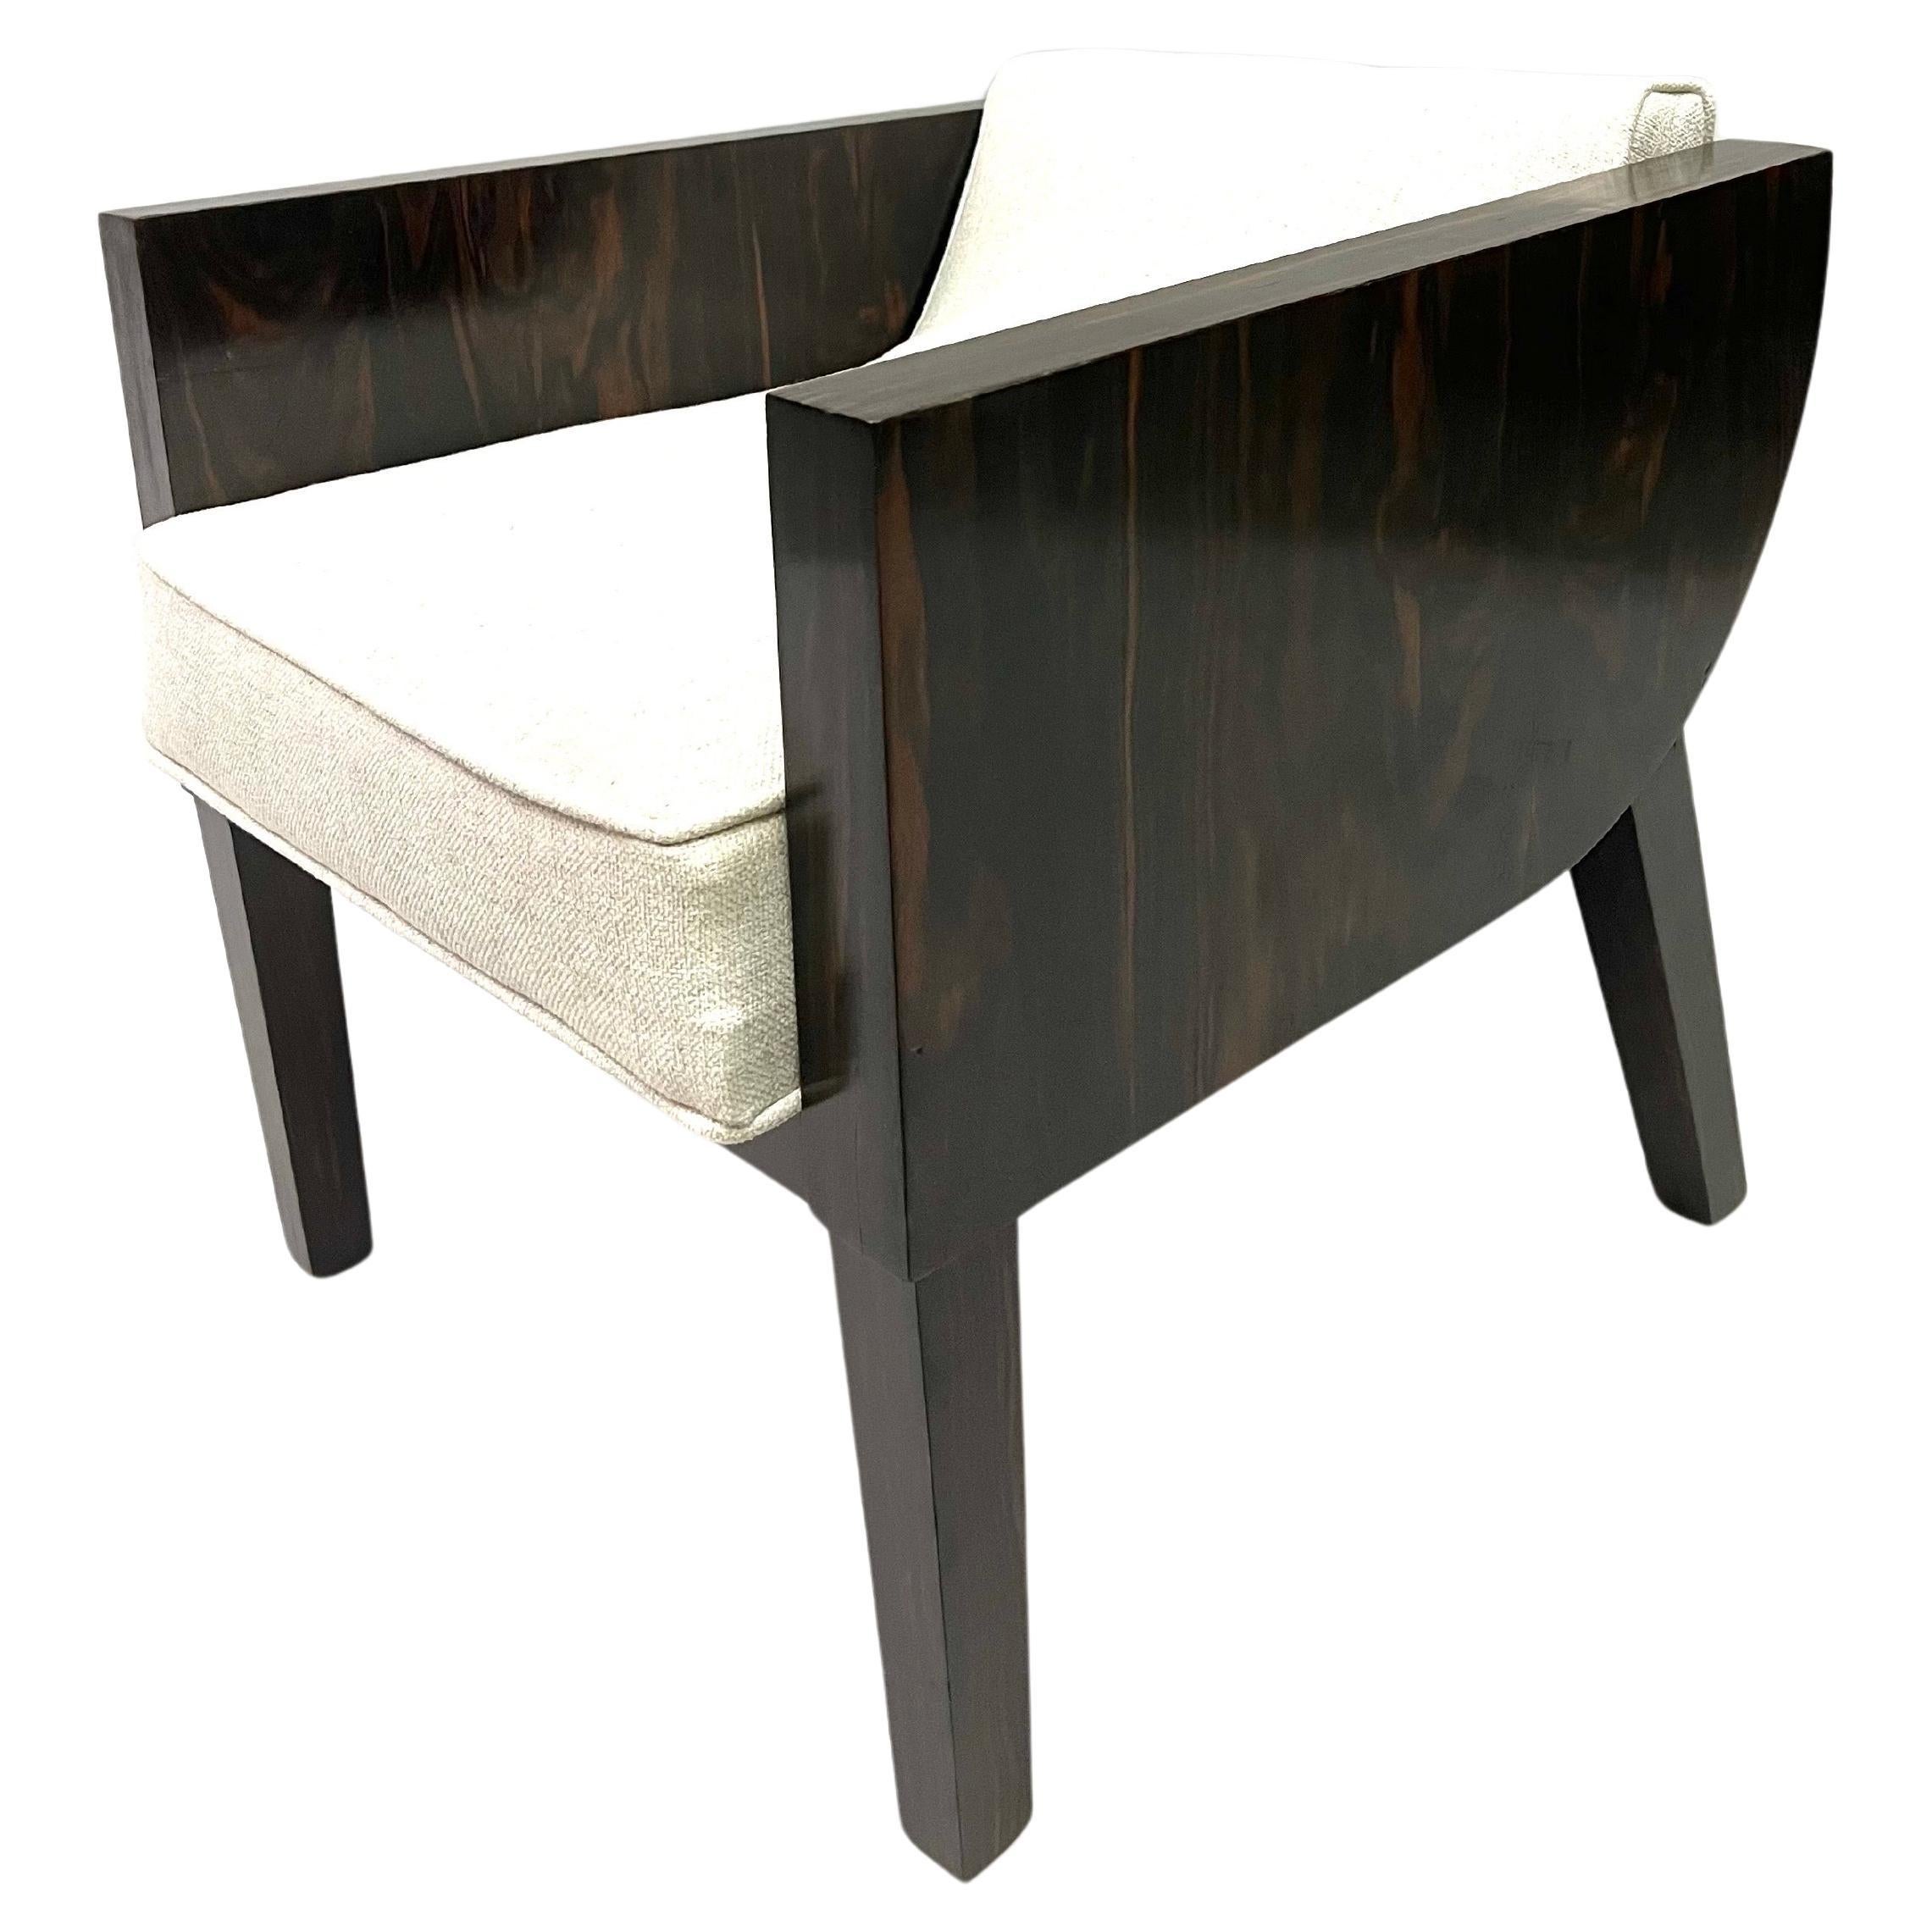 French Art Deco Macassar Ebony Armchair in the Style of Emile-Jacques Ruhlmann